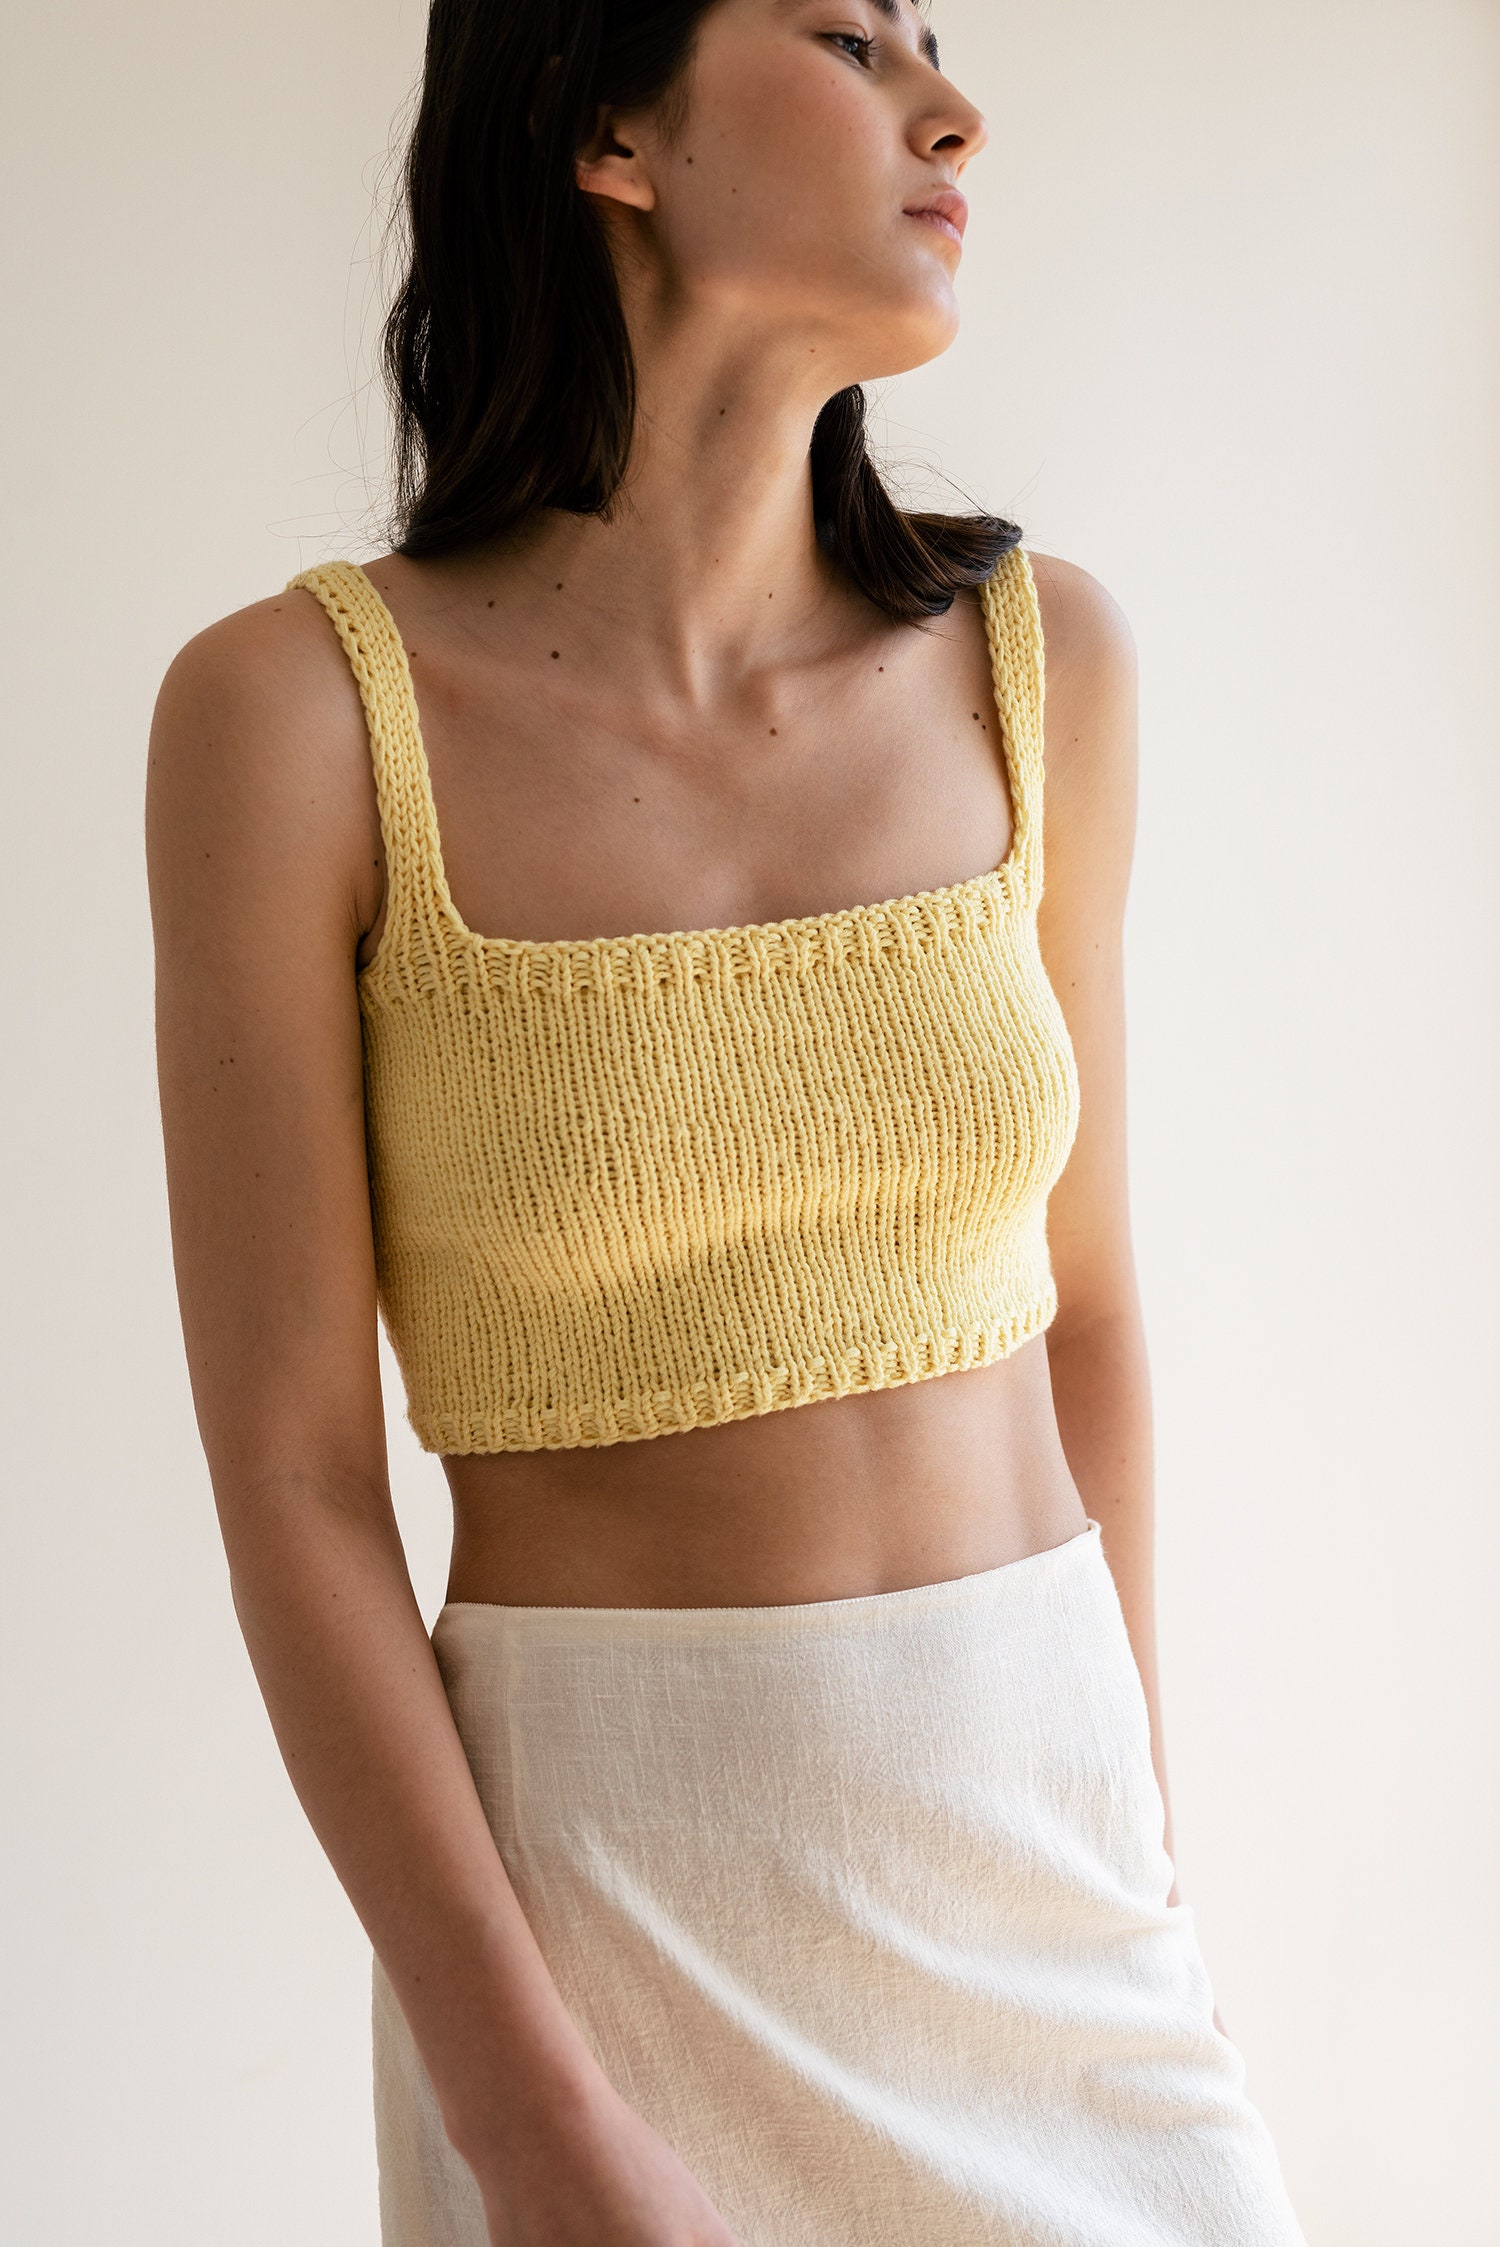 Square Neck Crop Top, Minimal Knit Top, Hand Knit Bralette Top, Black Cropped  Yoga Top, Square Neckline, Sports Knit Bra, Fitted Cotton Top -  Canada